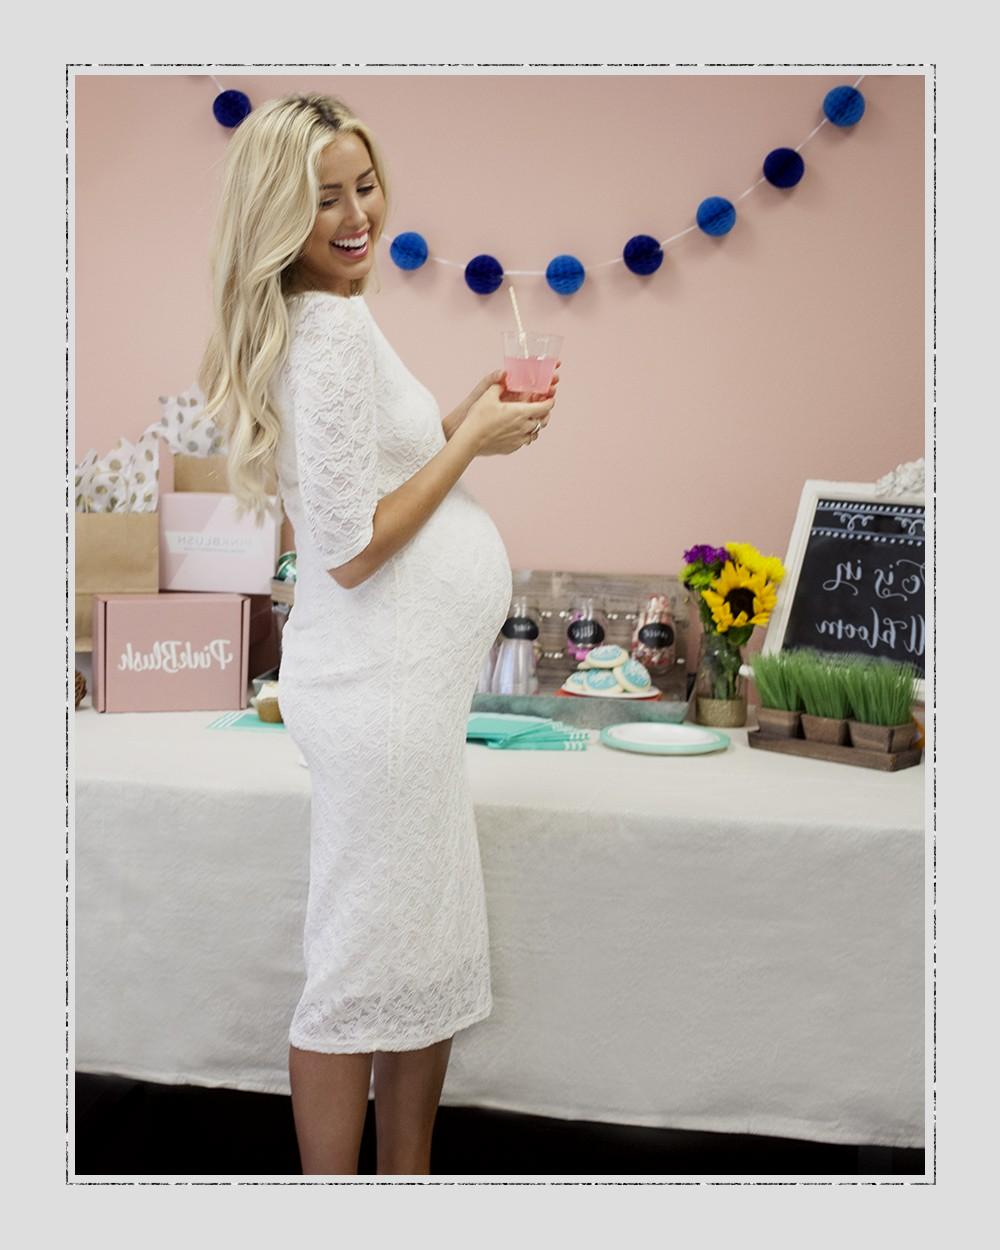 Full Size of Baby Shower:baby Shower Dresses Trendy Affordable Maternity Clothes Inexpensive Maternity Clothes Maternity Dresses For Photoshoot Cute Baby Shower Outfits For Mom Maternity Maxi Dresses Maternity Dresses Maternity Gown Style